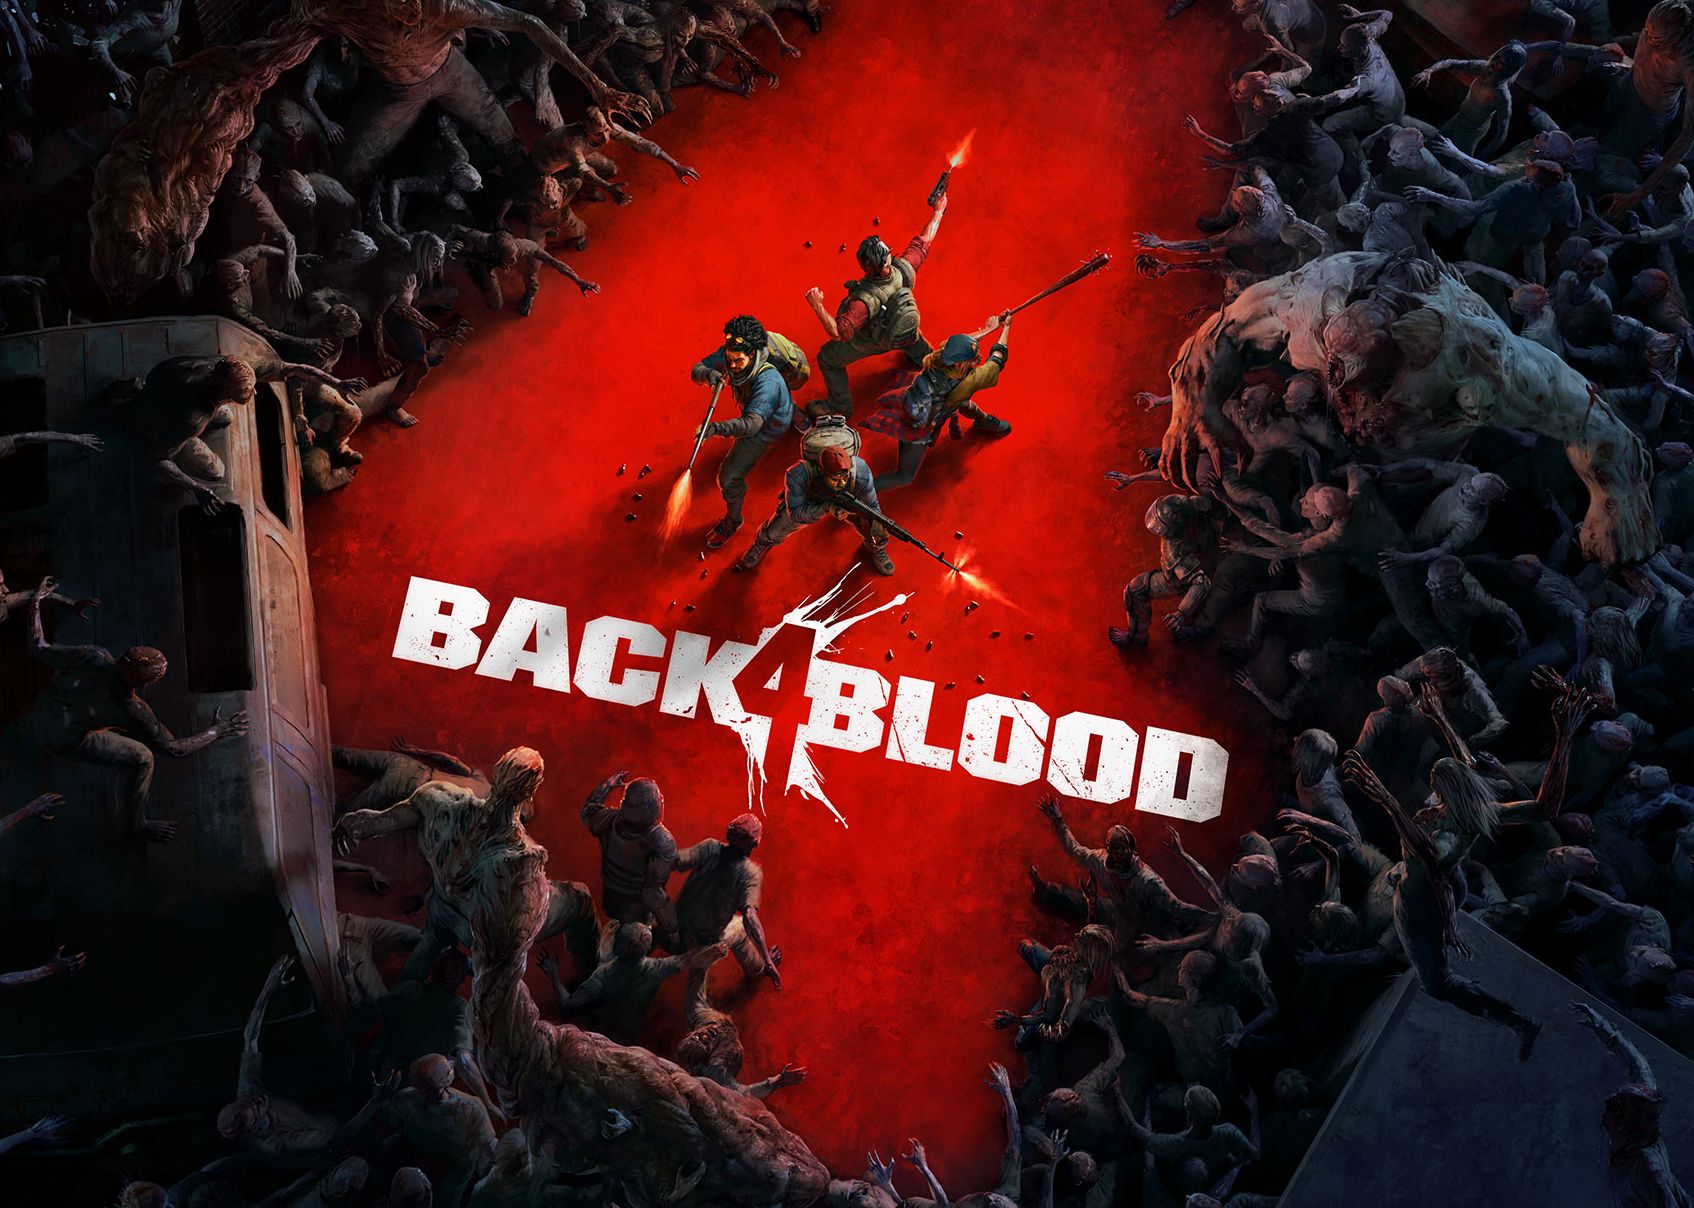 Image for Back 4 Blood is getting an open beta in August